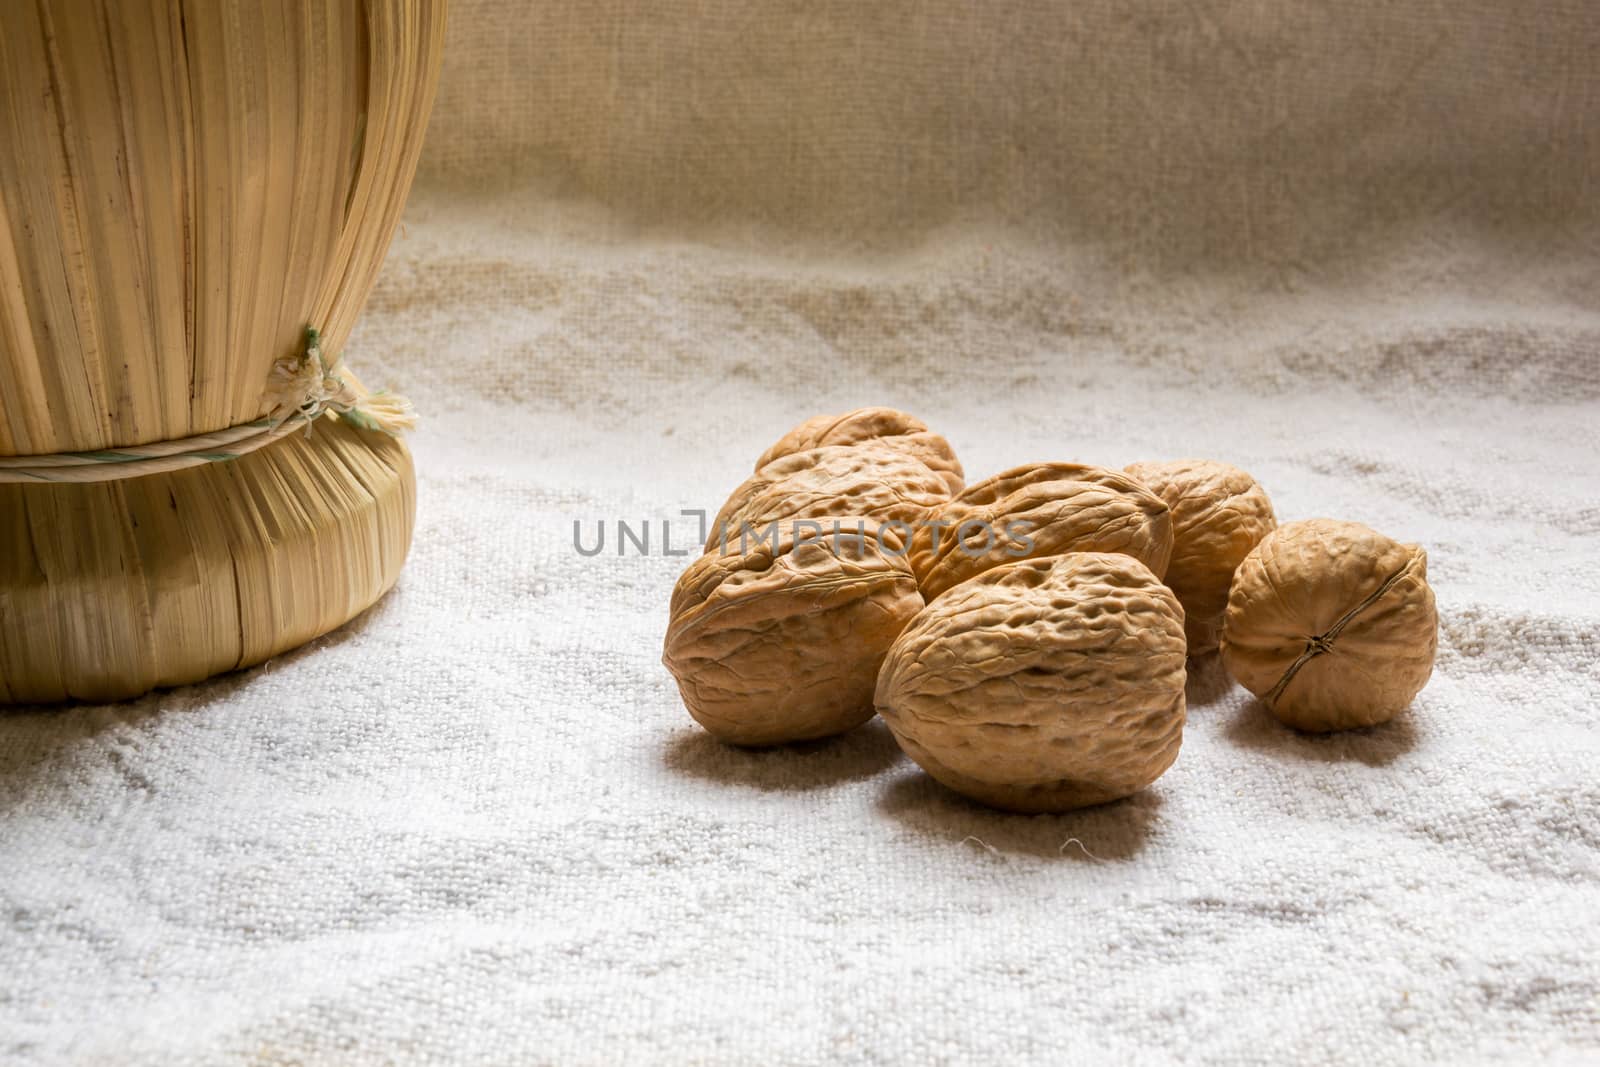 Set with some walnuts and a wine bottle by enrico.lapponi